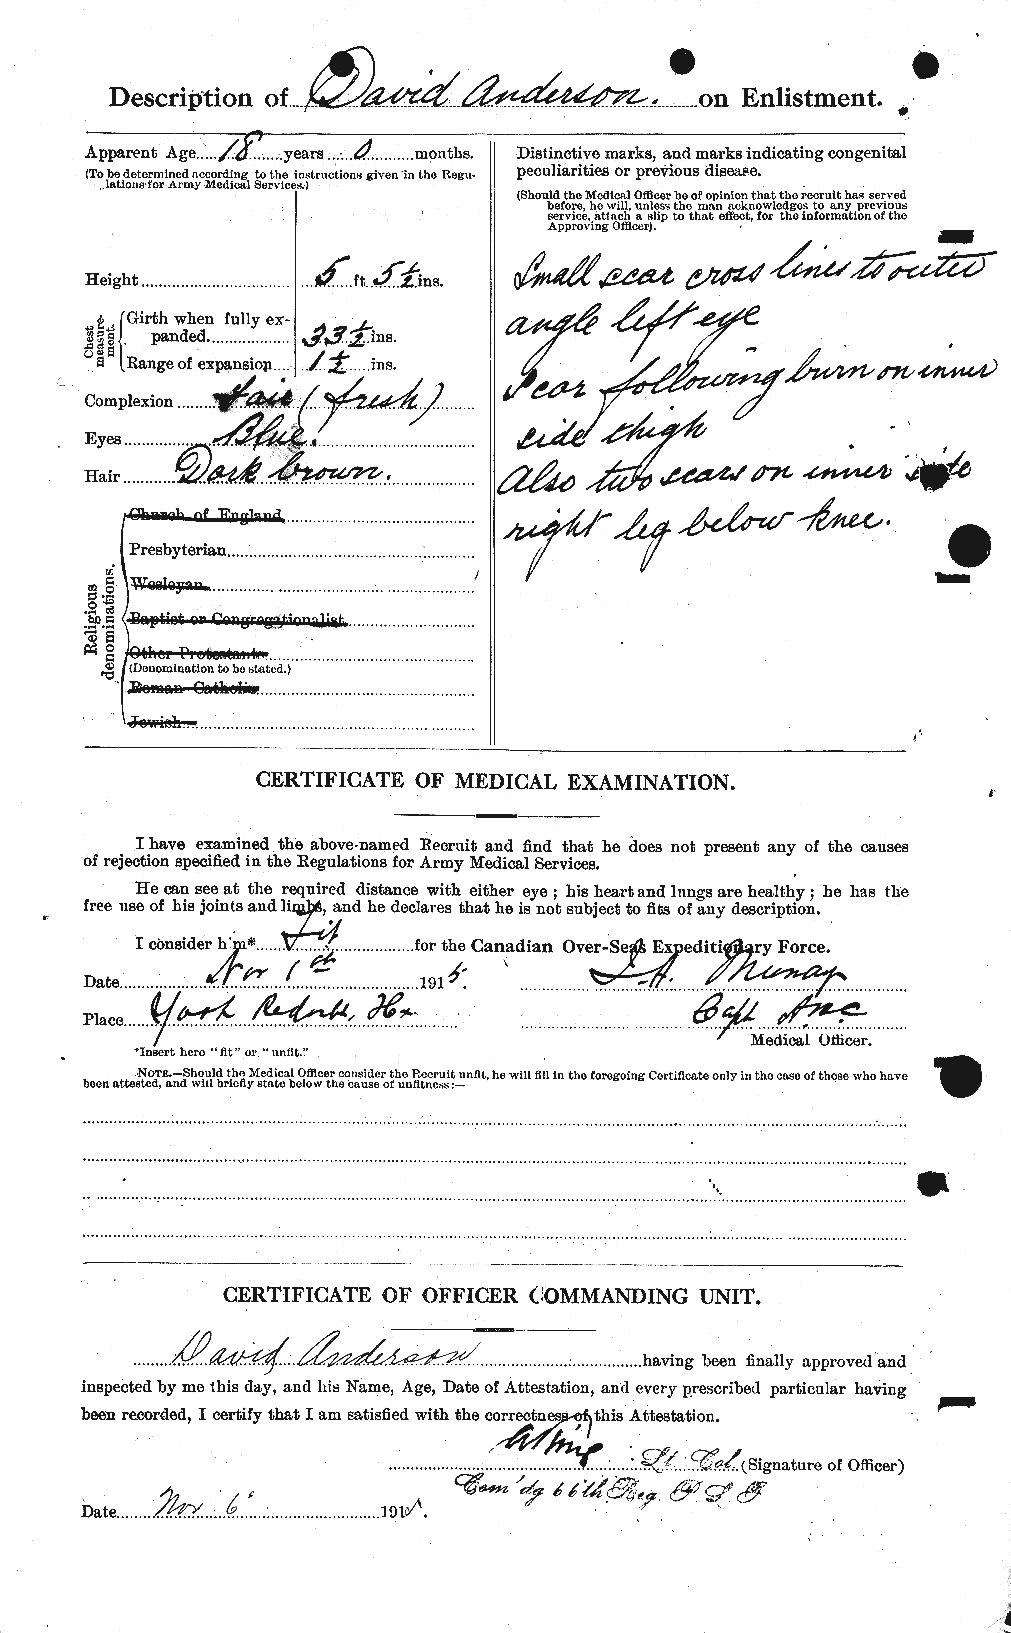 Personnel Records of the First World War - CEF 210025b